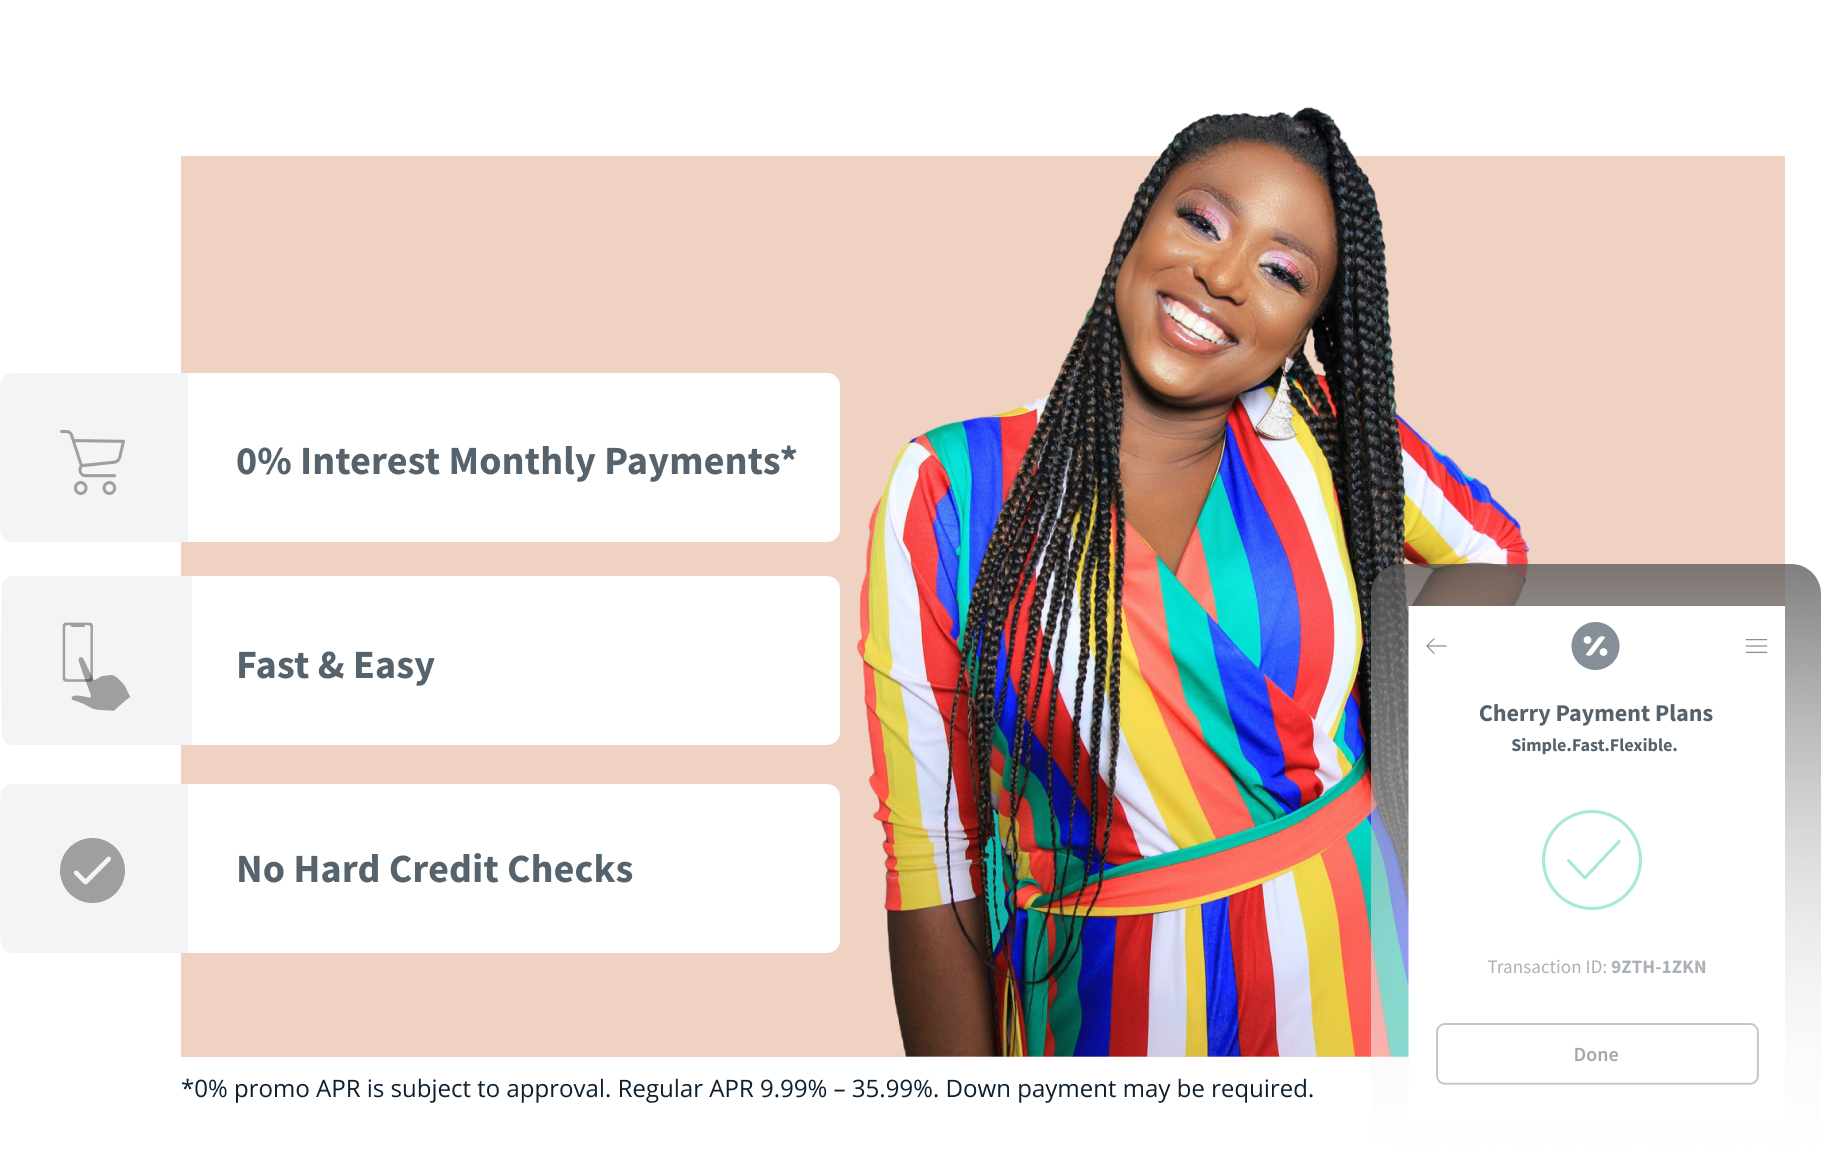 Woman in a colorful dress smiles - text that says: 0% interest monthly payments, fast and easy, no hard credit checks